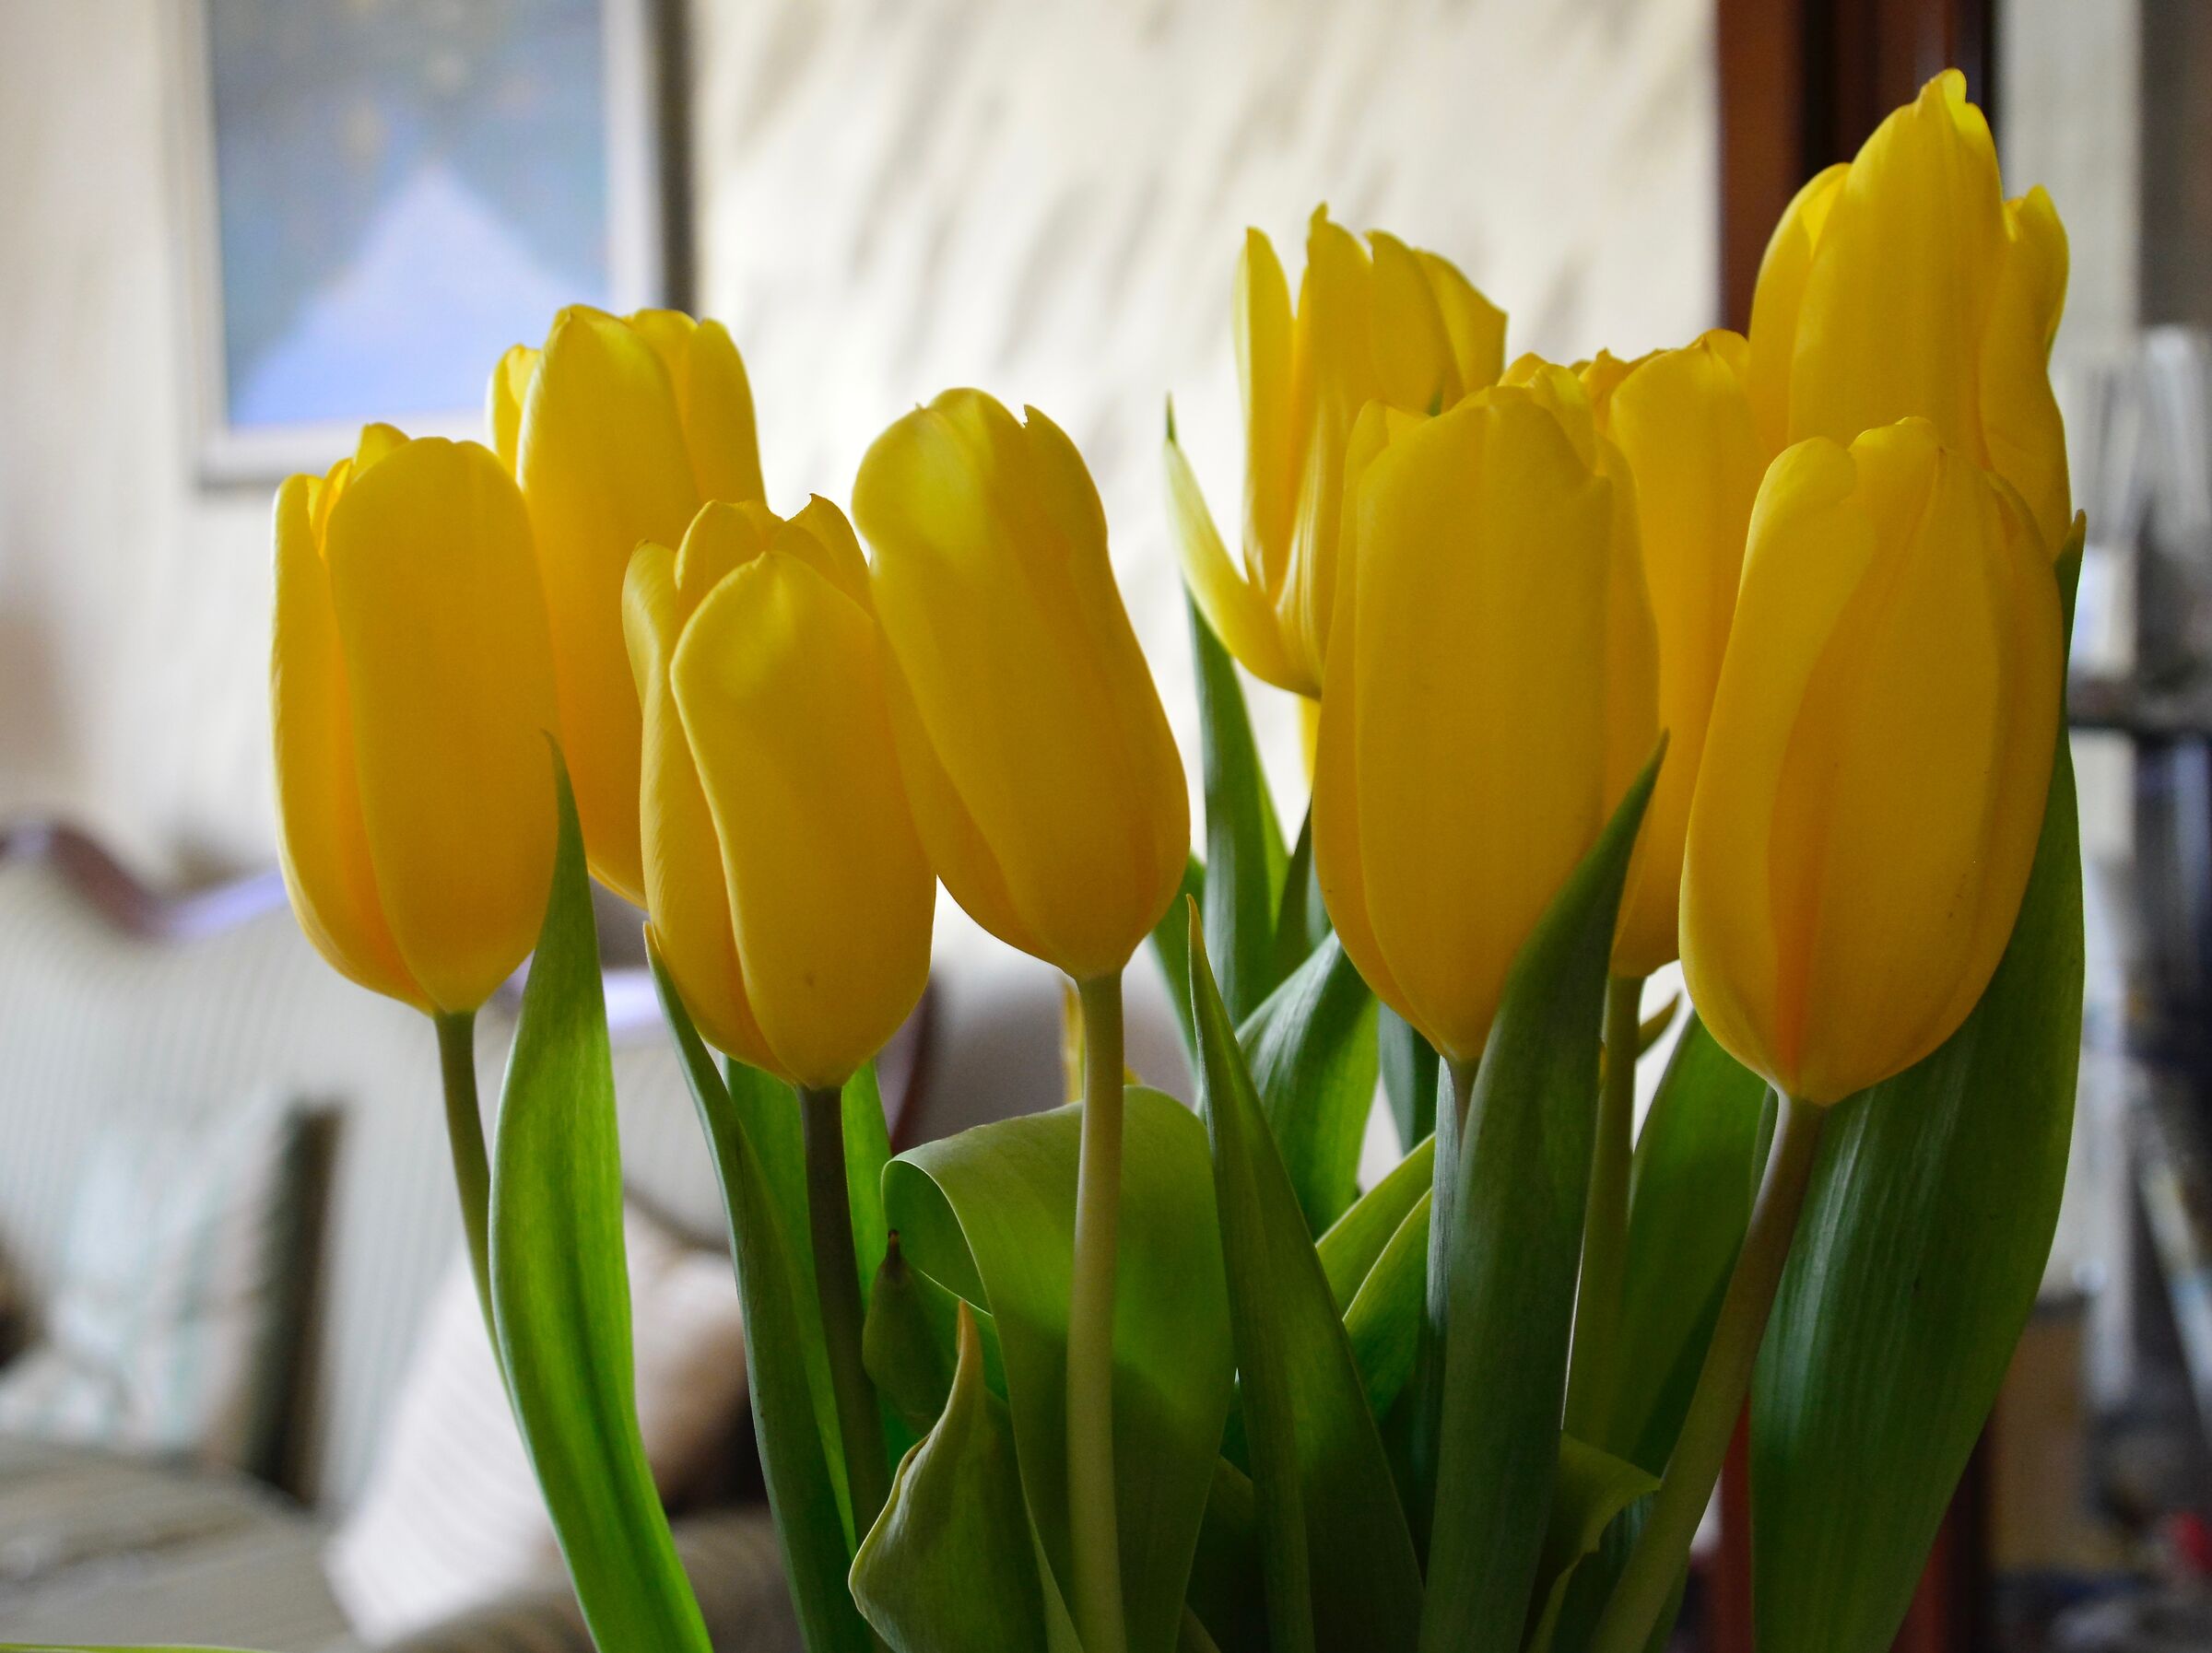 Tulips in the House...